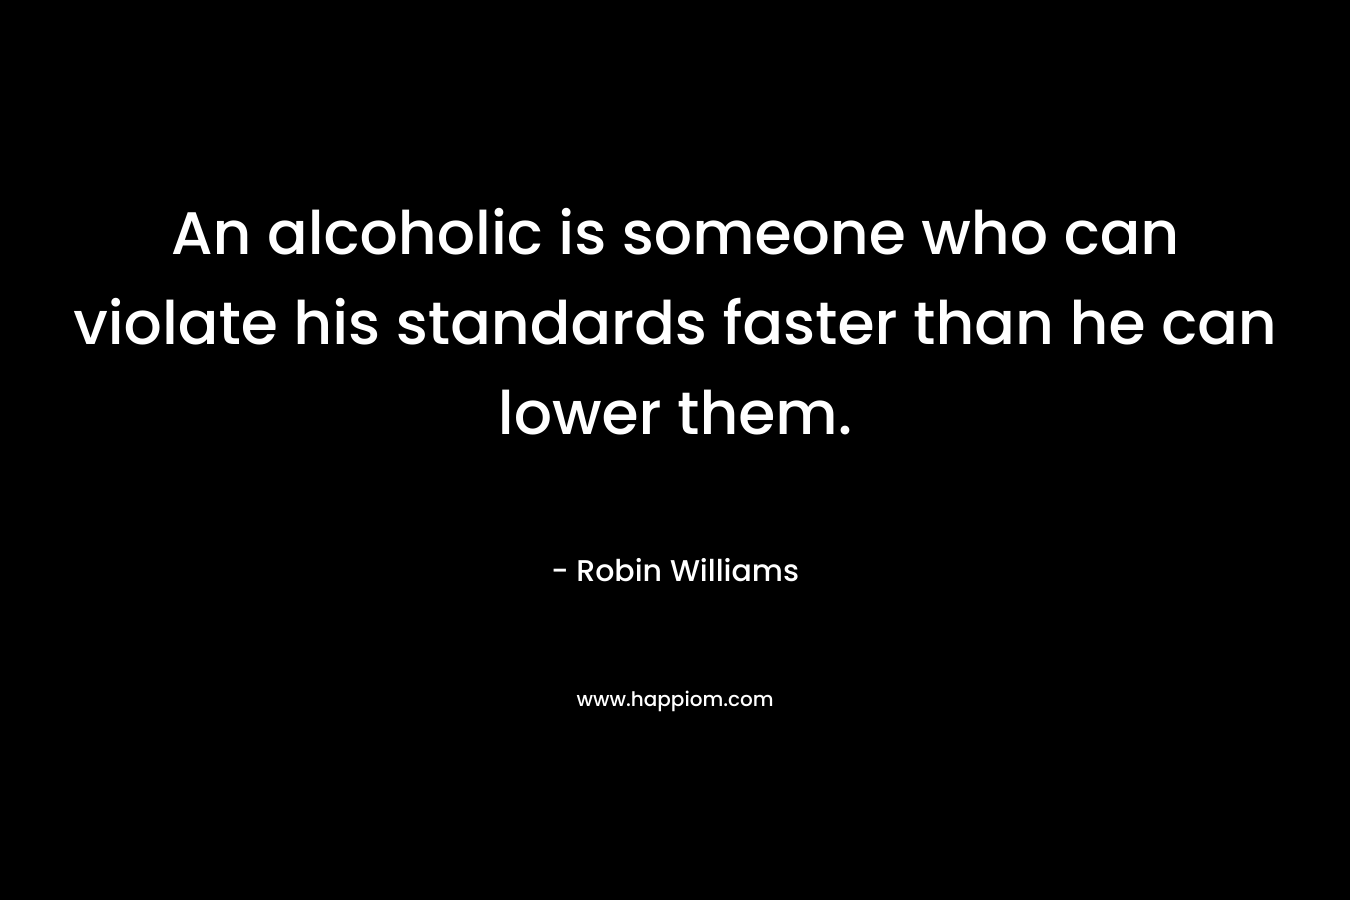 An alcoholic is someone who can violate his standards faster than he can lower them. – Robin Williams